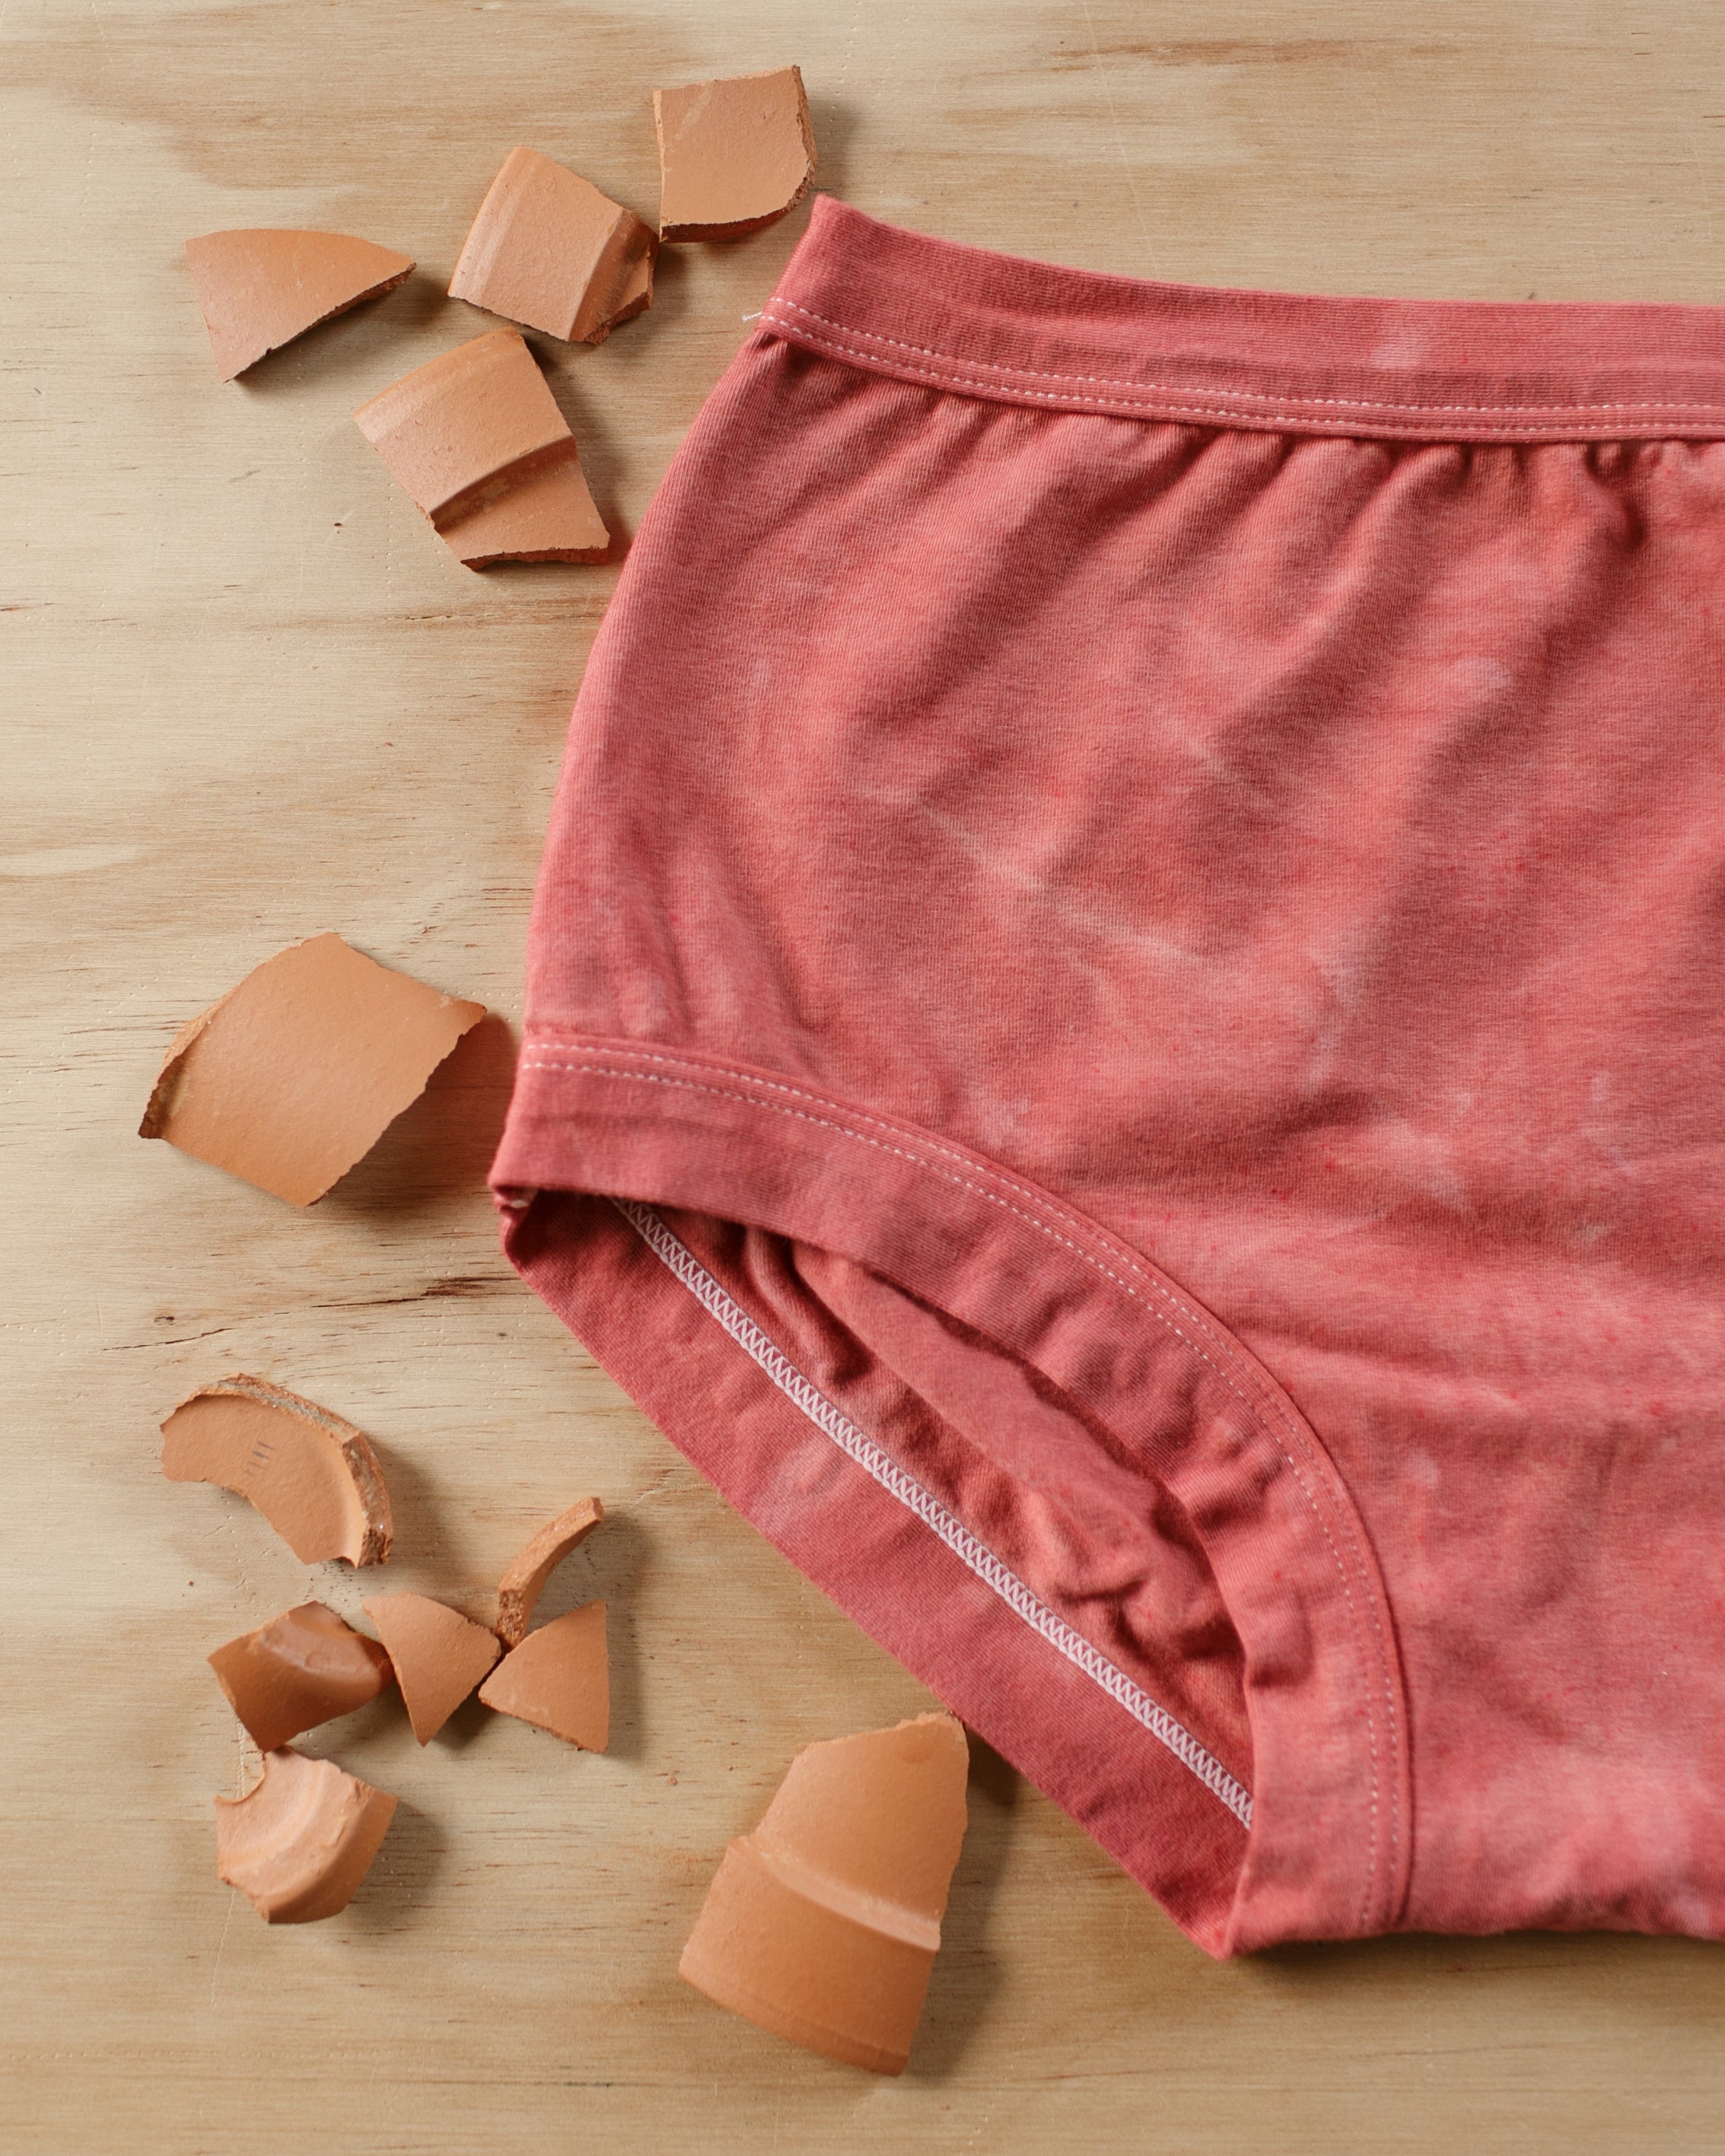 Flat lay of Thunderpants organic cotton Original style underwear in hand dyed Terracotta with broken terracotta around.